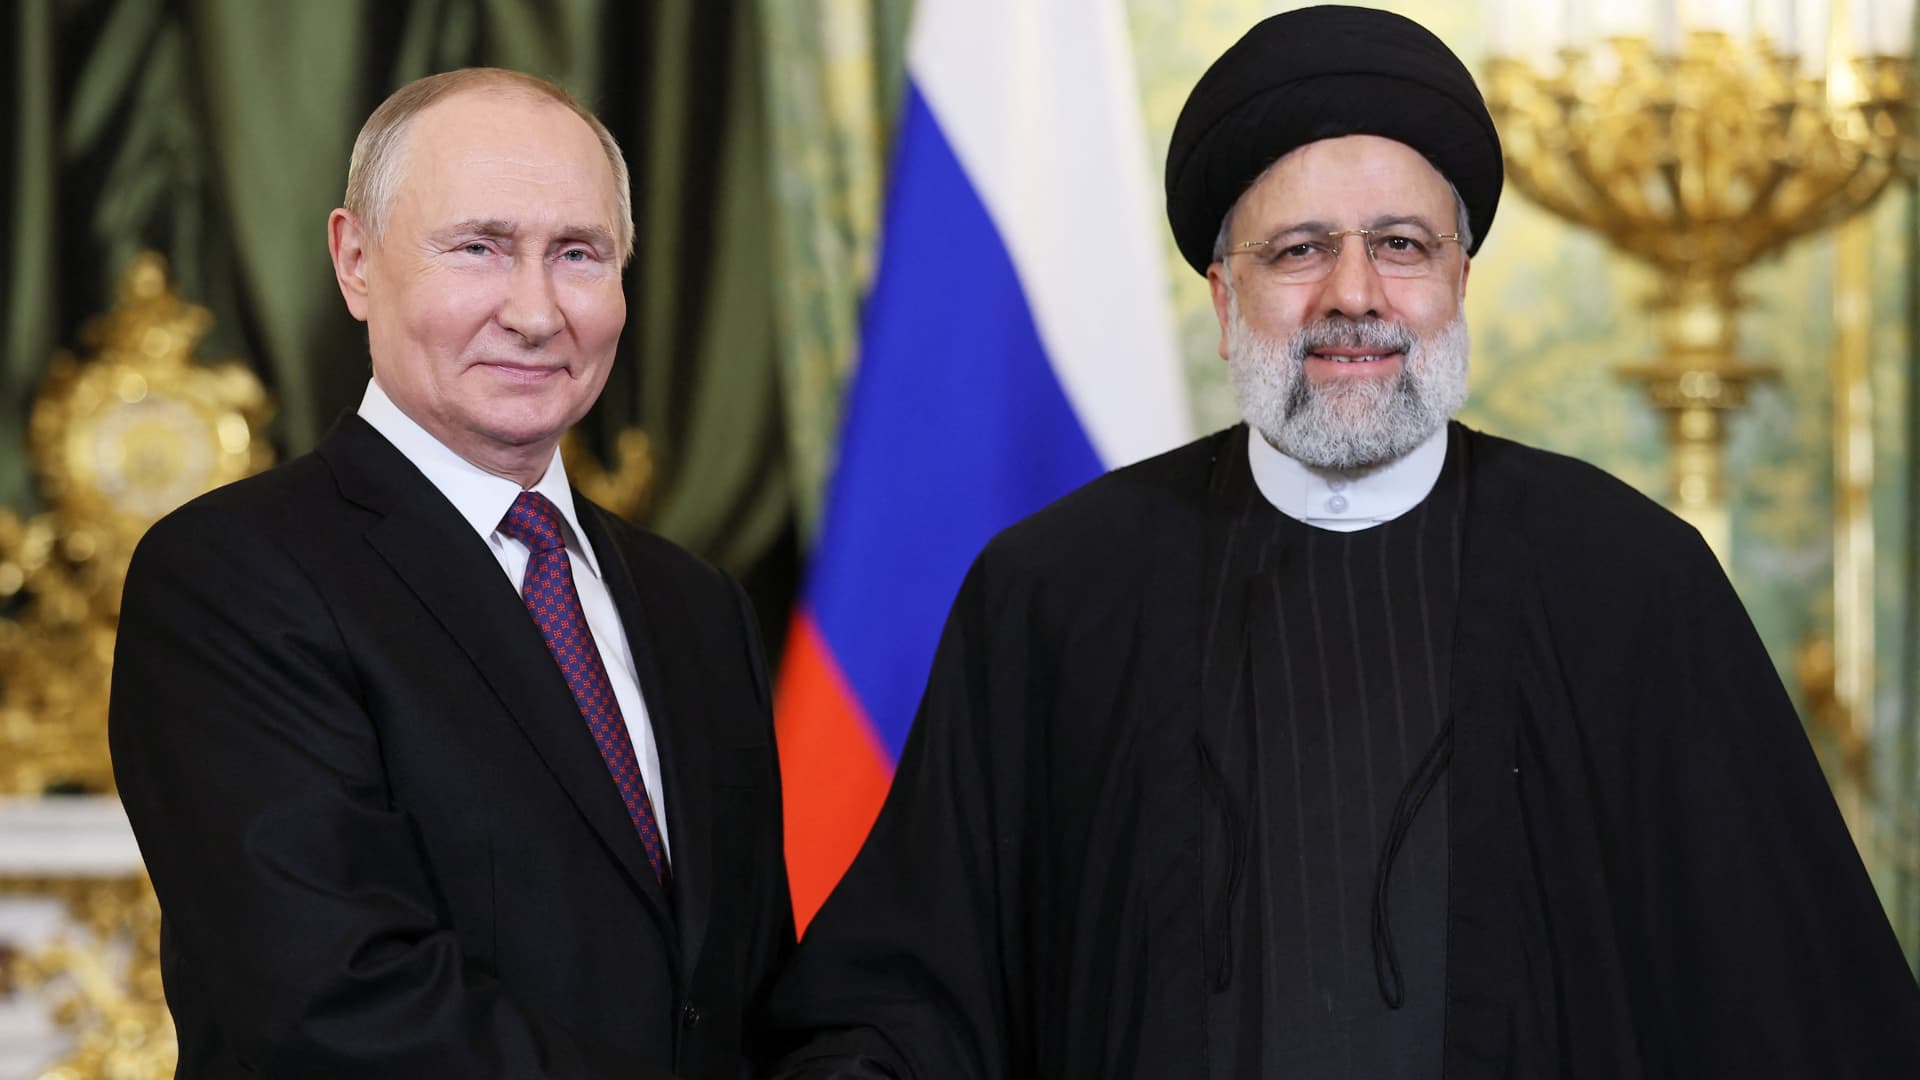 In this pool photograph distributed by Russian news agency Sputnik on December 7, 2023, Russia's President Vladimir Putin (L) shakes hands with Iran's President Ebrahim Raisi during their meeting in the Kremlin in Moscow.